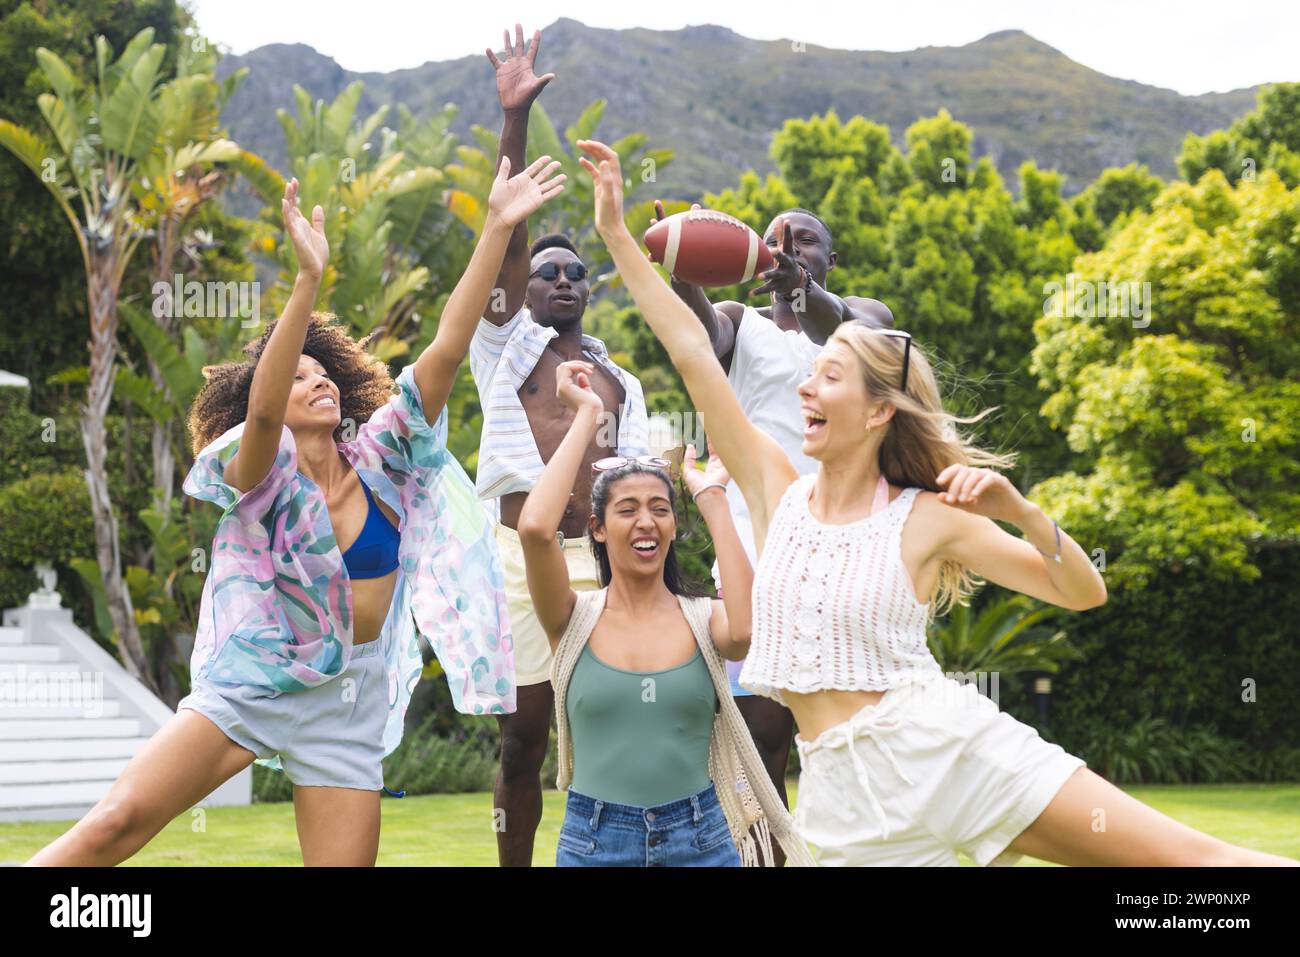 Diverse group of friends playing with a football outdoors, expressions of joy evident Stock Photo